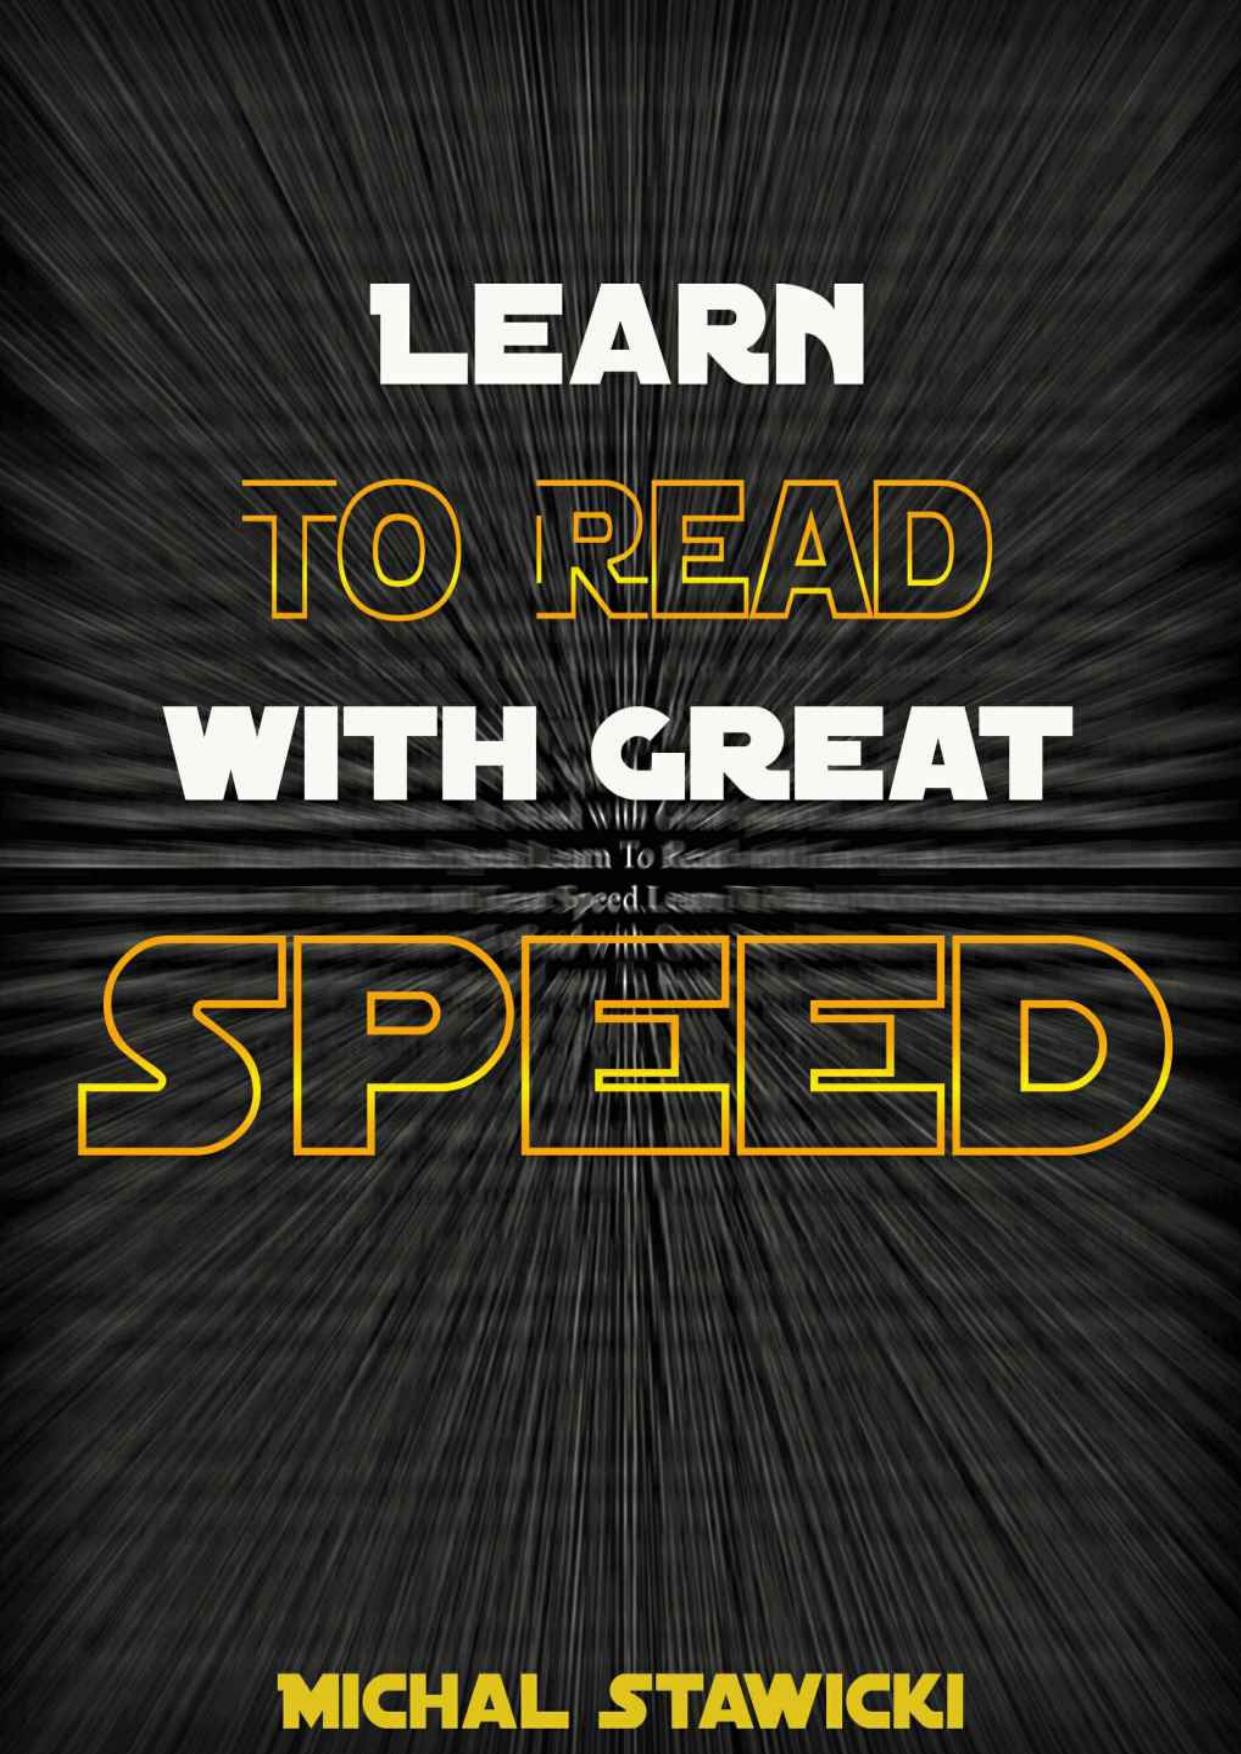 Learn to Read with Great Speed! Only 10 minutes a day! (How to Change Your Life in 10 Minutes a Day Book 2)